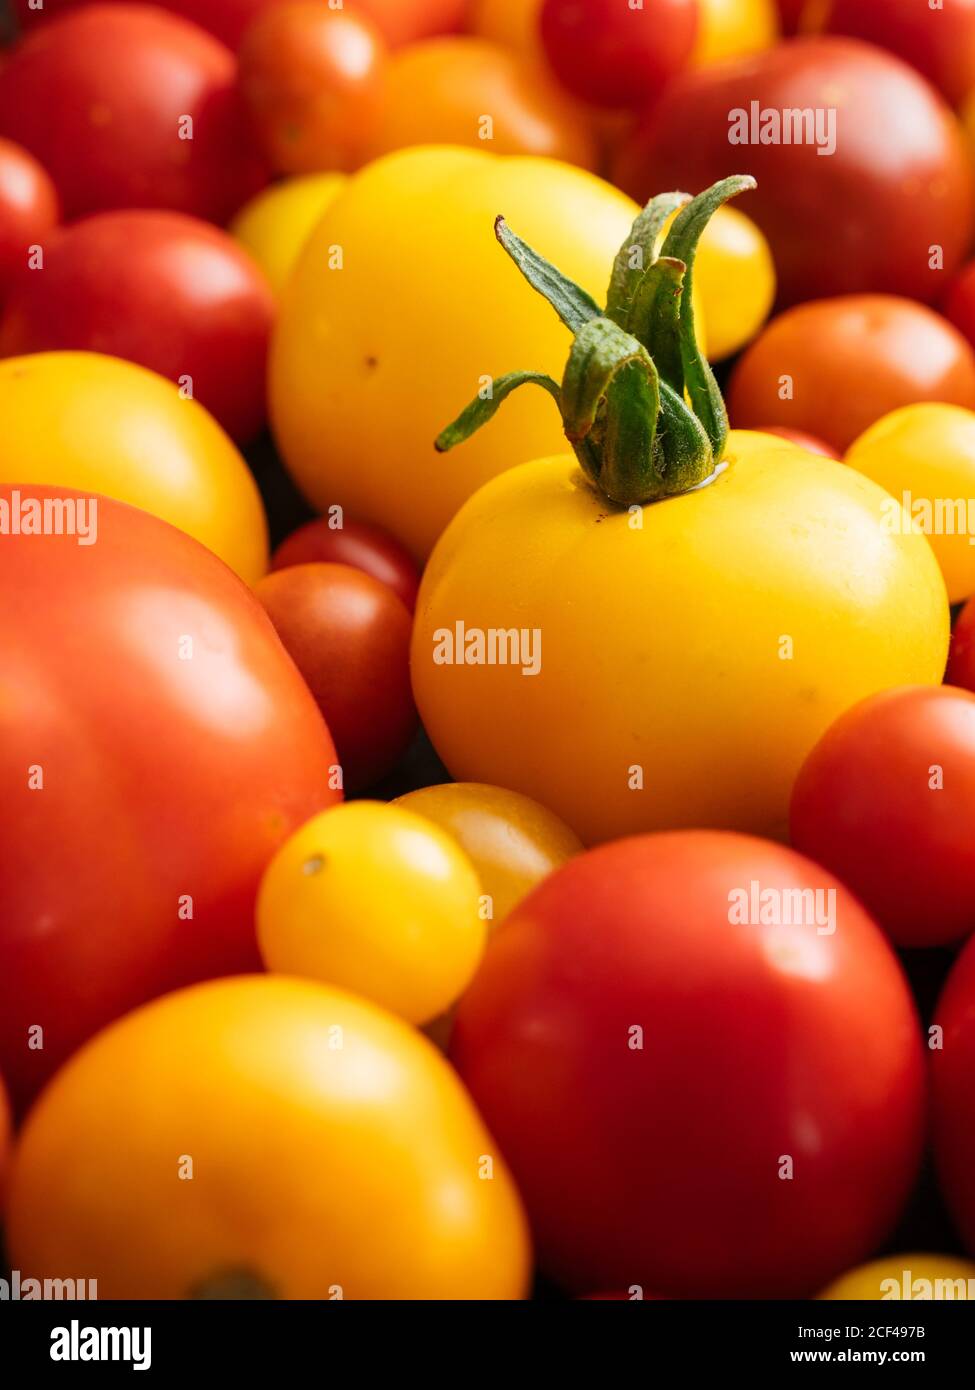 Collection of red, orange and yellow tomato cultivars. Stock Photo